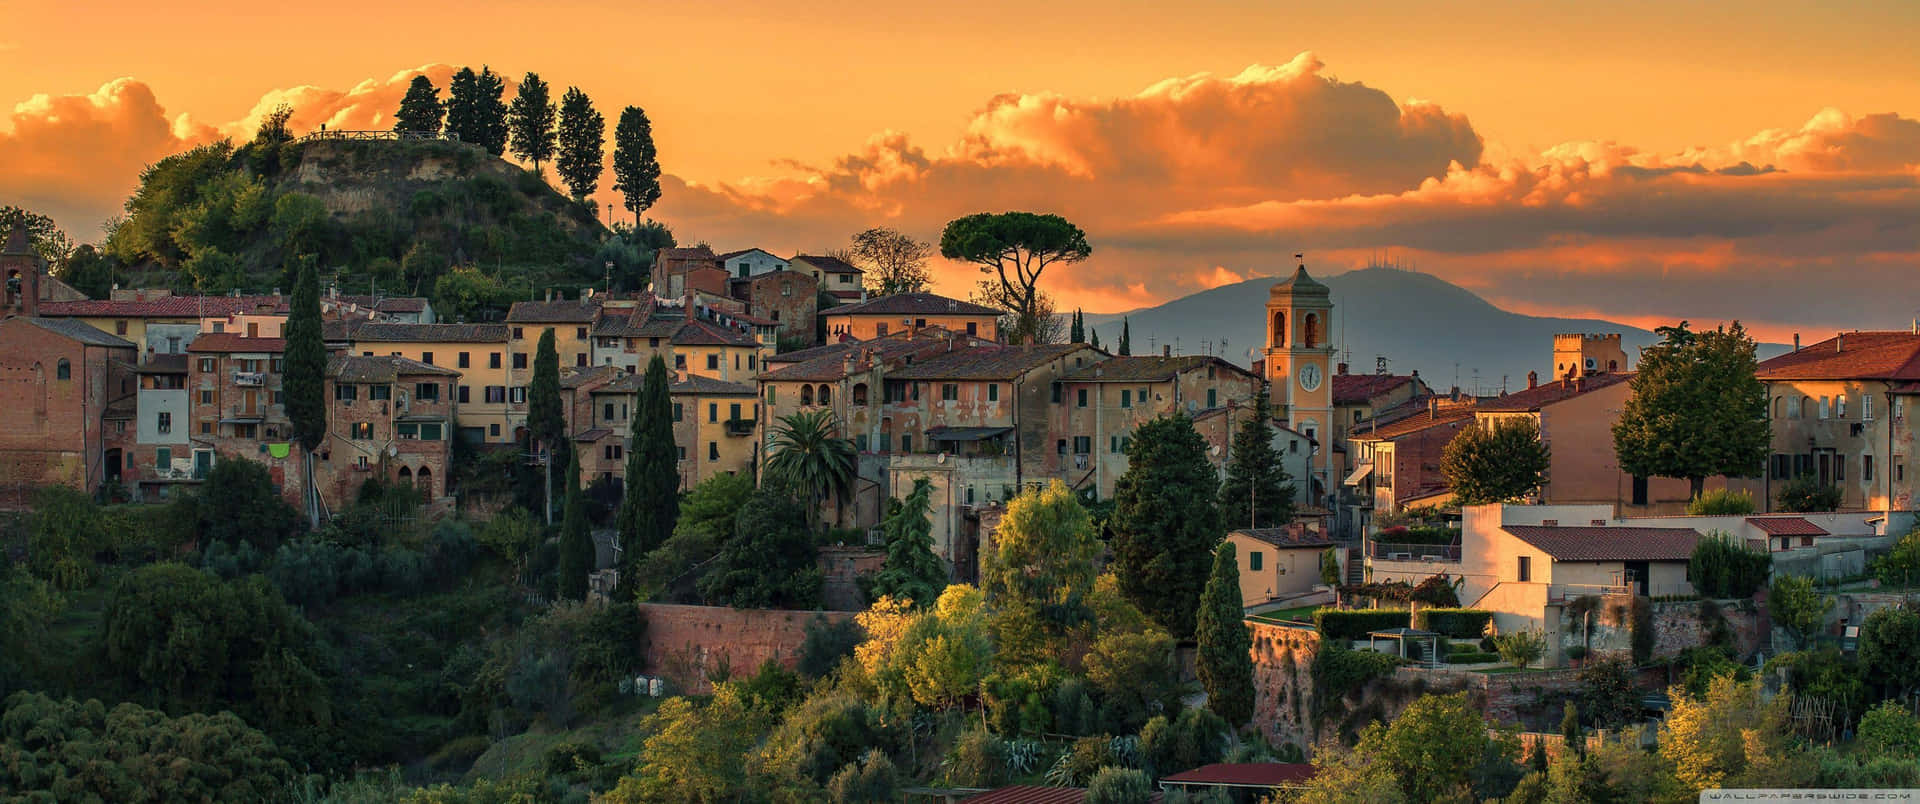 A Town Is Seen At Sunset In Italy Wallpaper